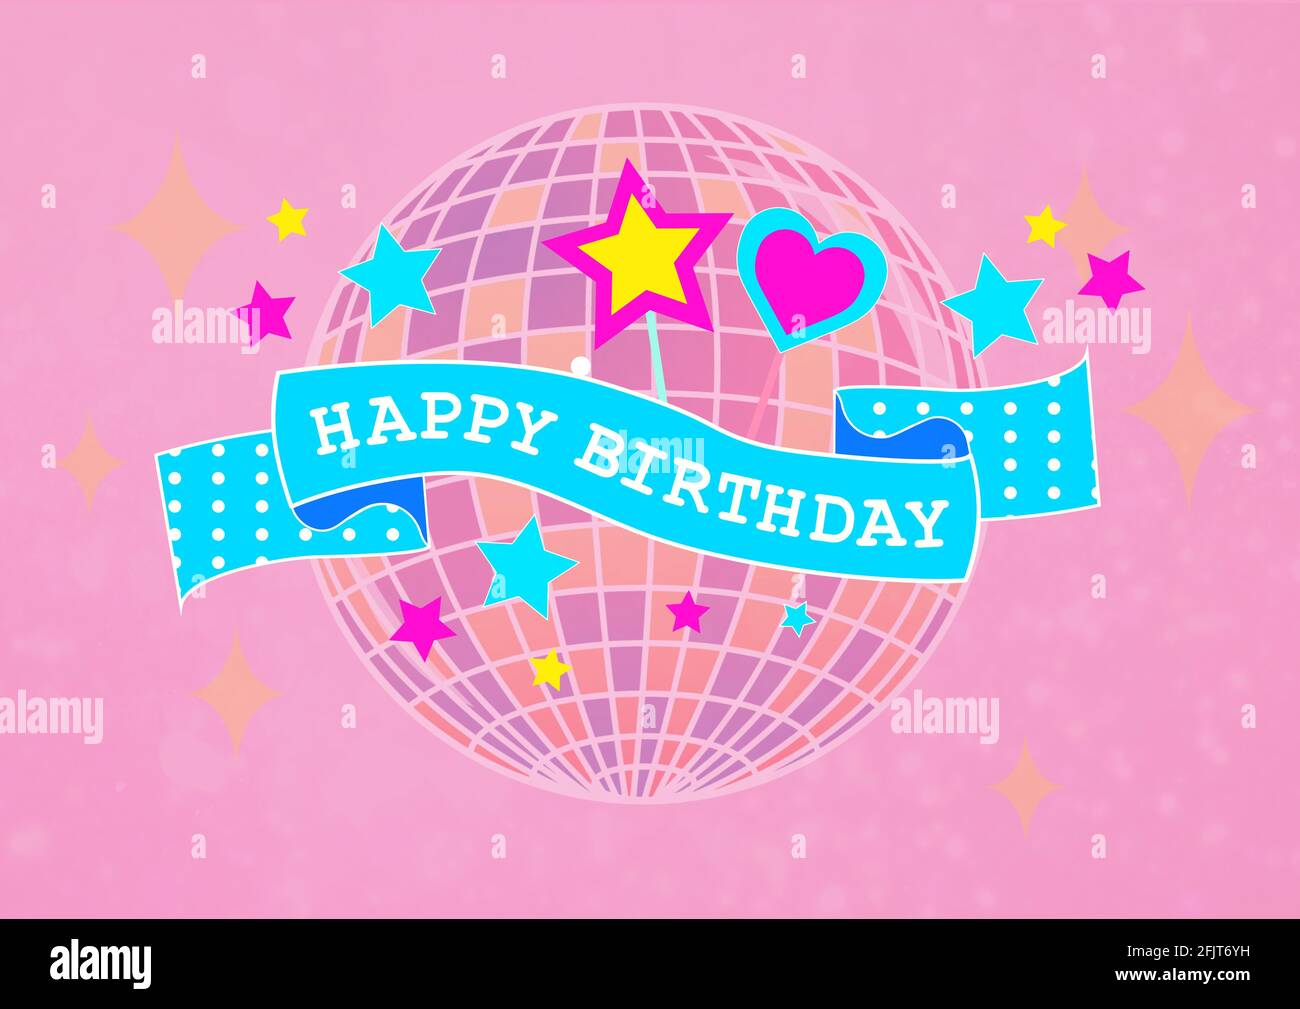 Happy birthday text over ribbon banner against disco ball and stars on pink background Stock Photo